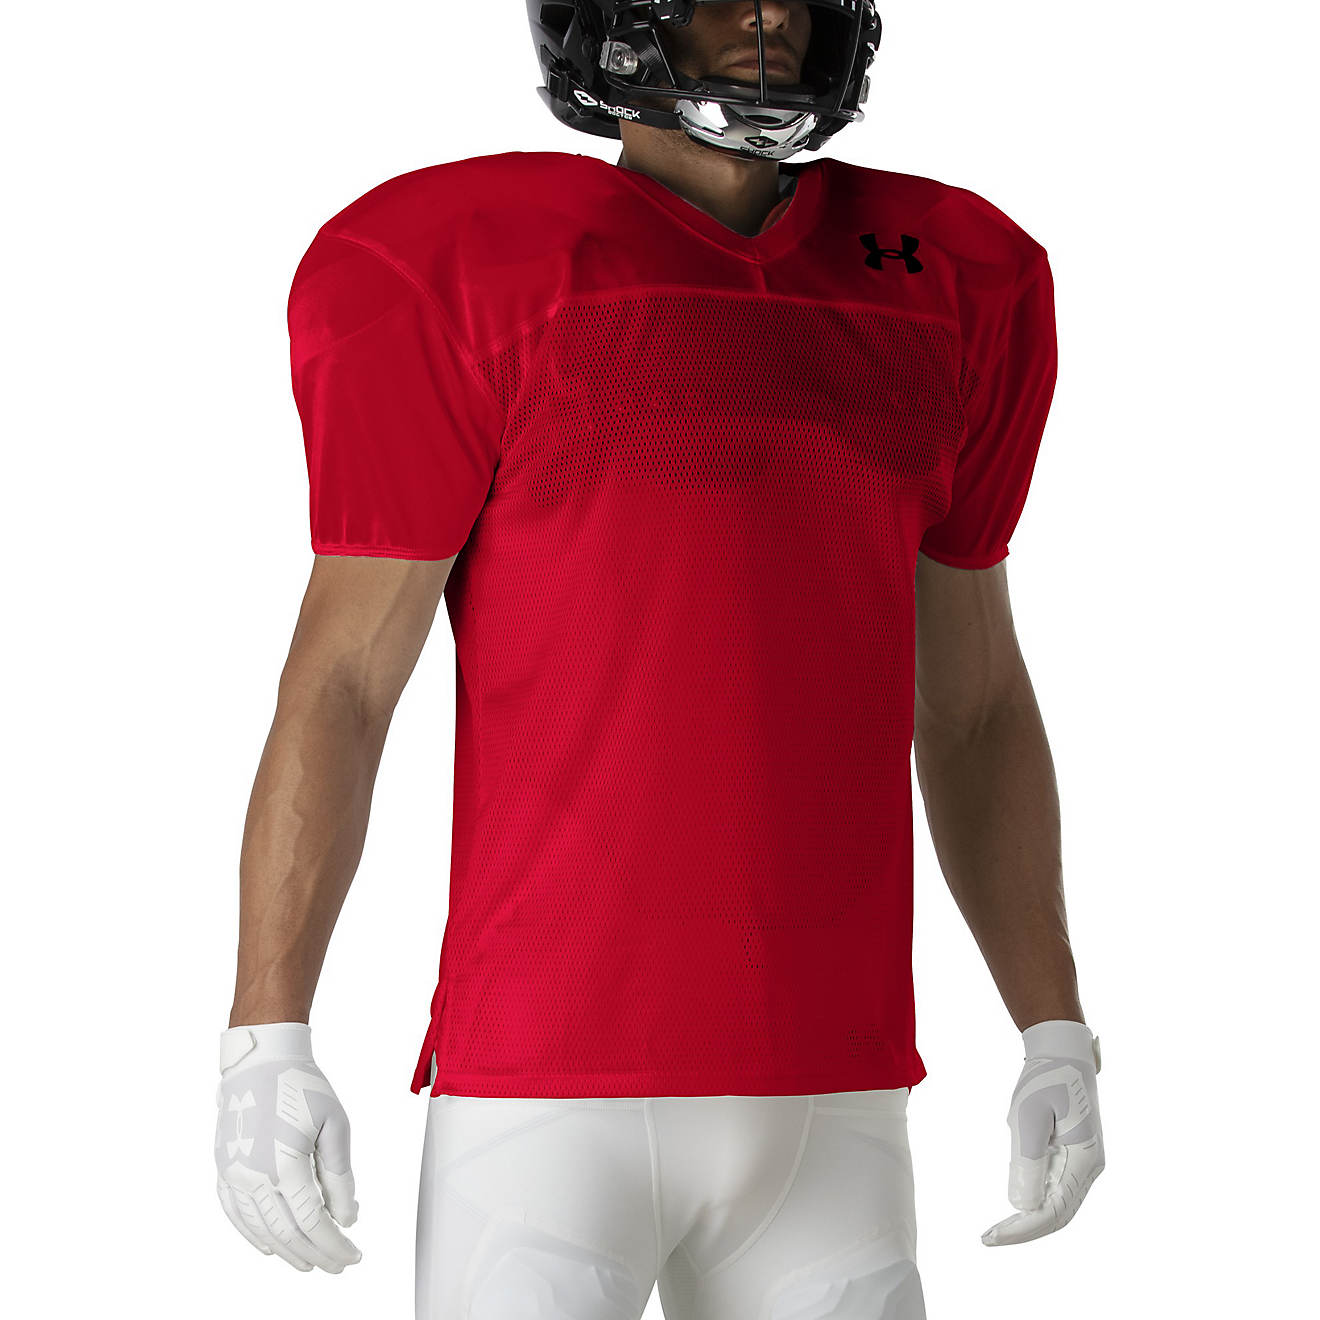 UA950-600 Visita lo Store di Under ArmourUnder Armour Youth Football Practice Jersey Red - Youth XL Red 